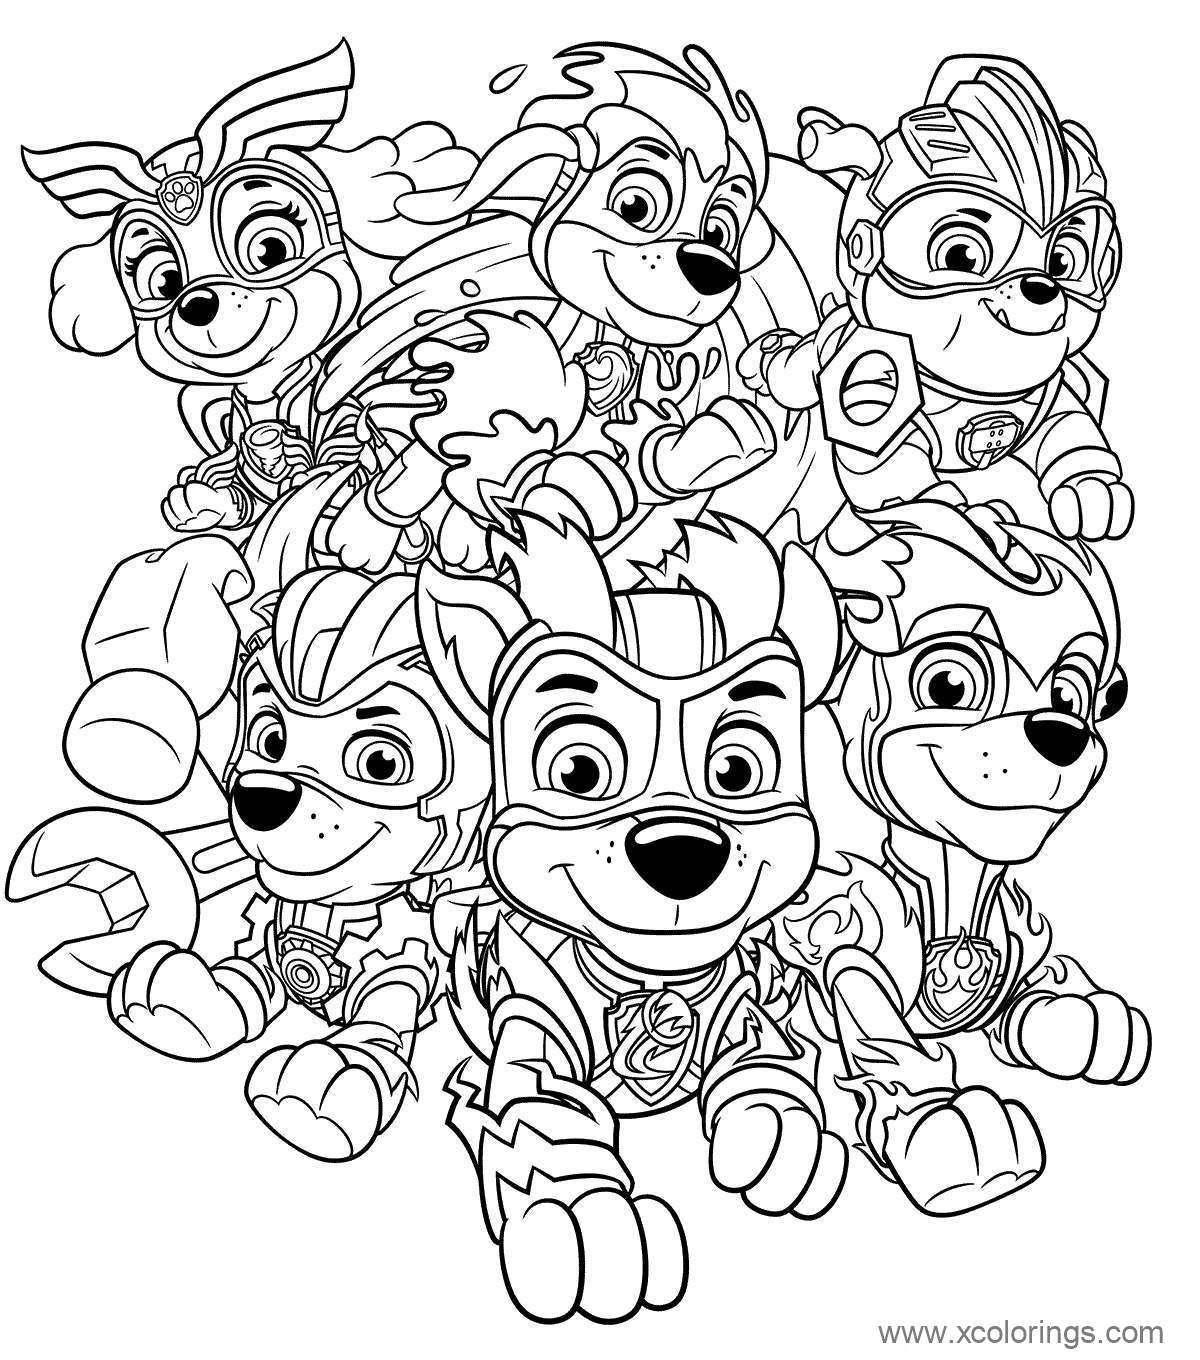 Free Mighty Pups Characters Coloring Pages printable